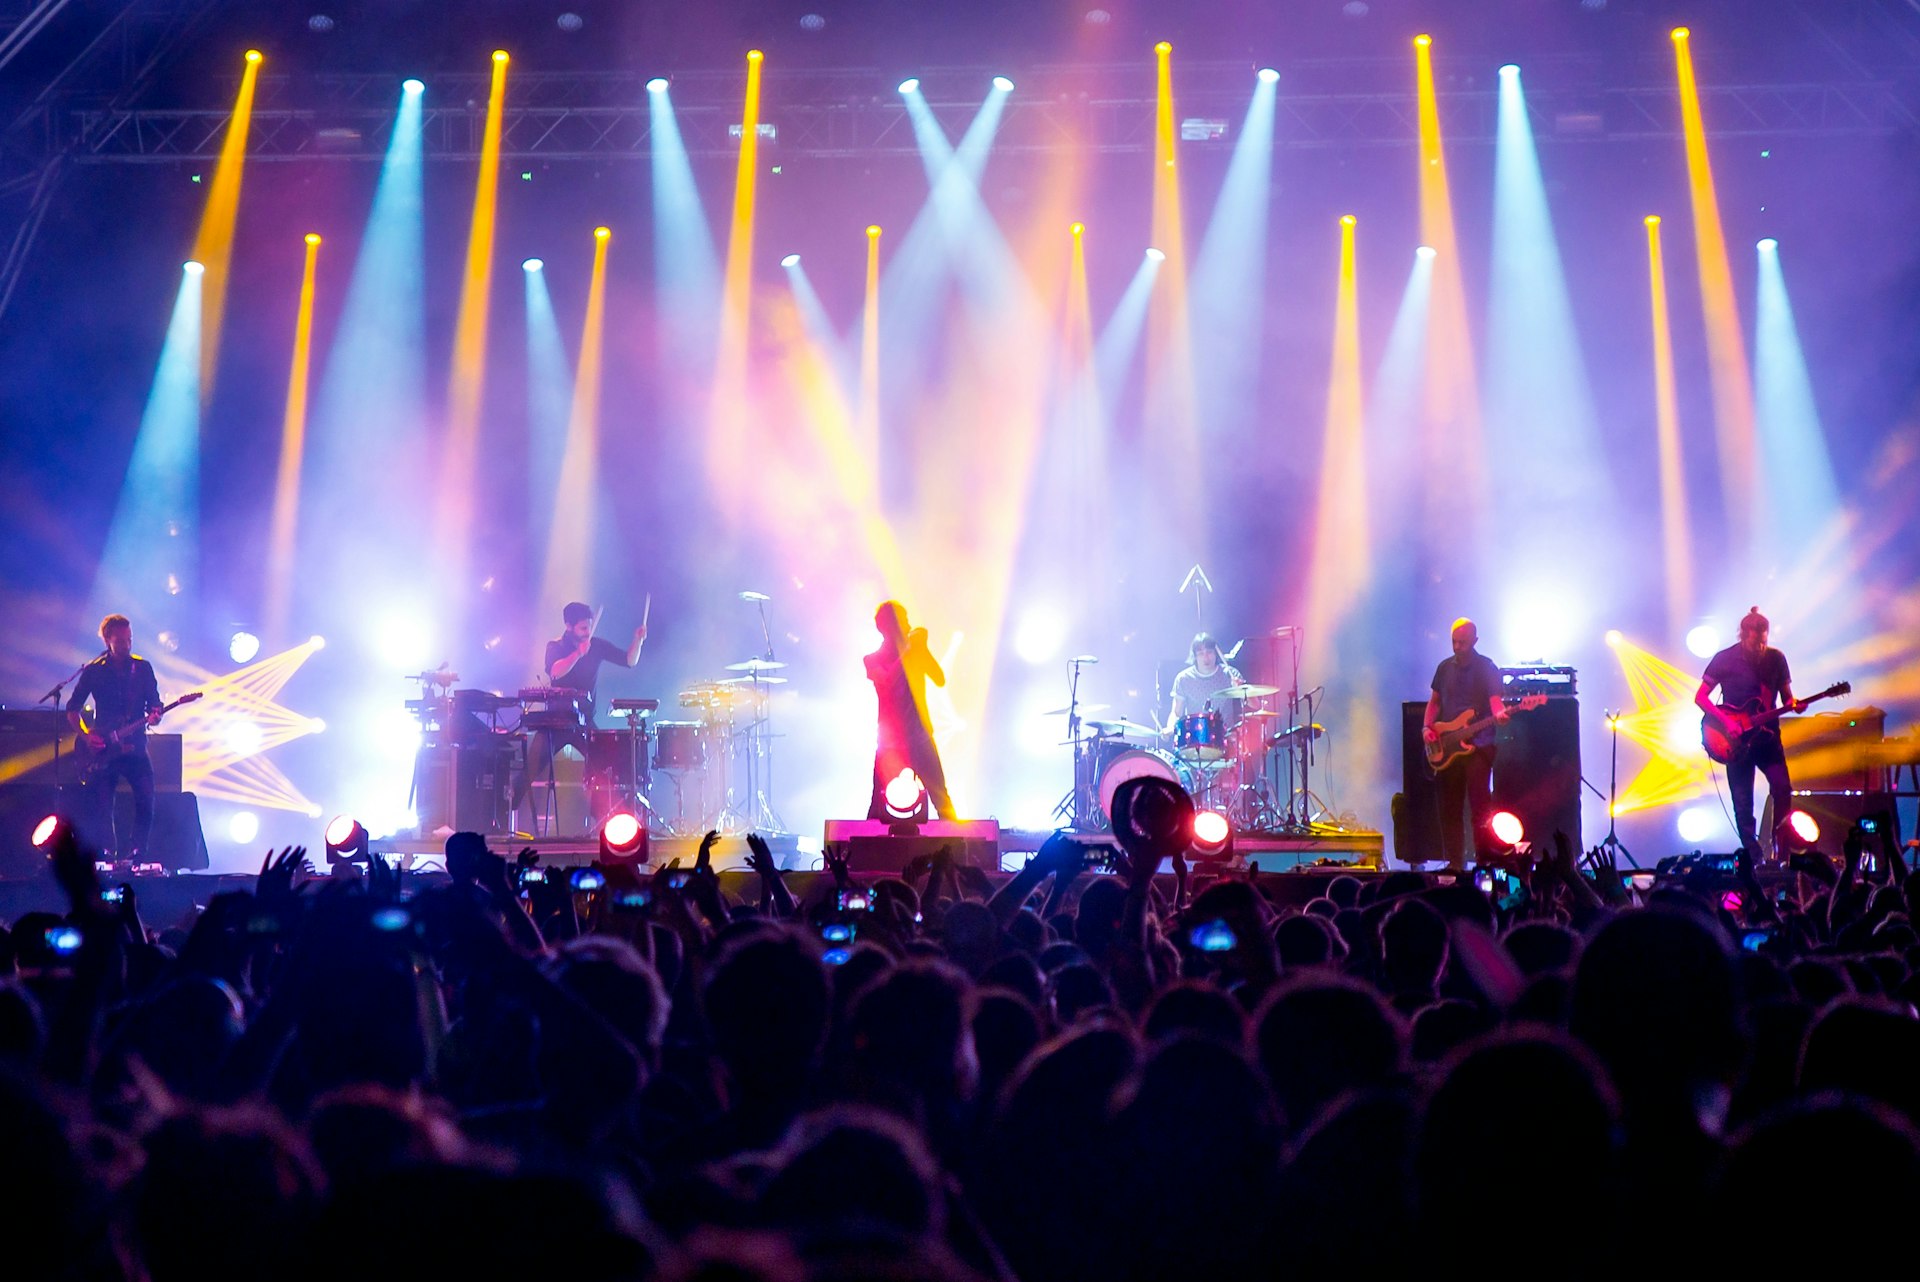 A band performing on stage is silhouetted among bright spotlights and smoke effects